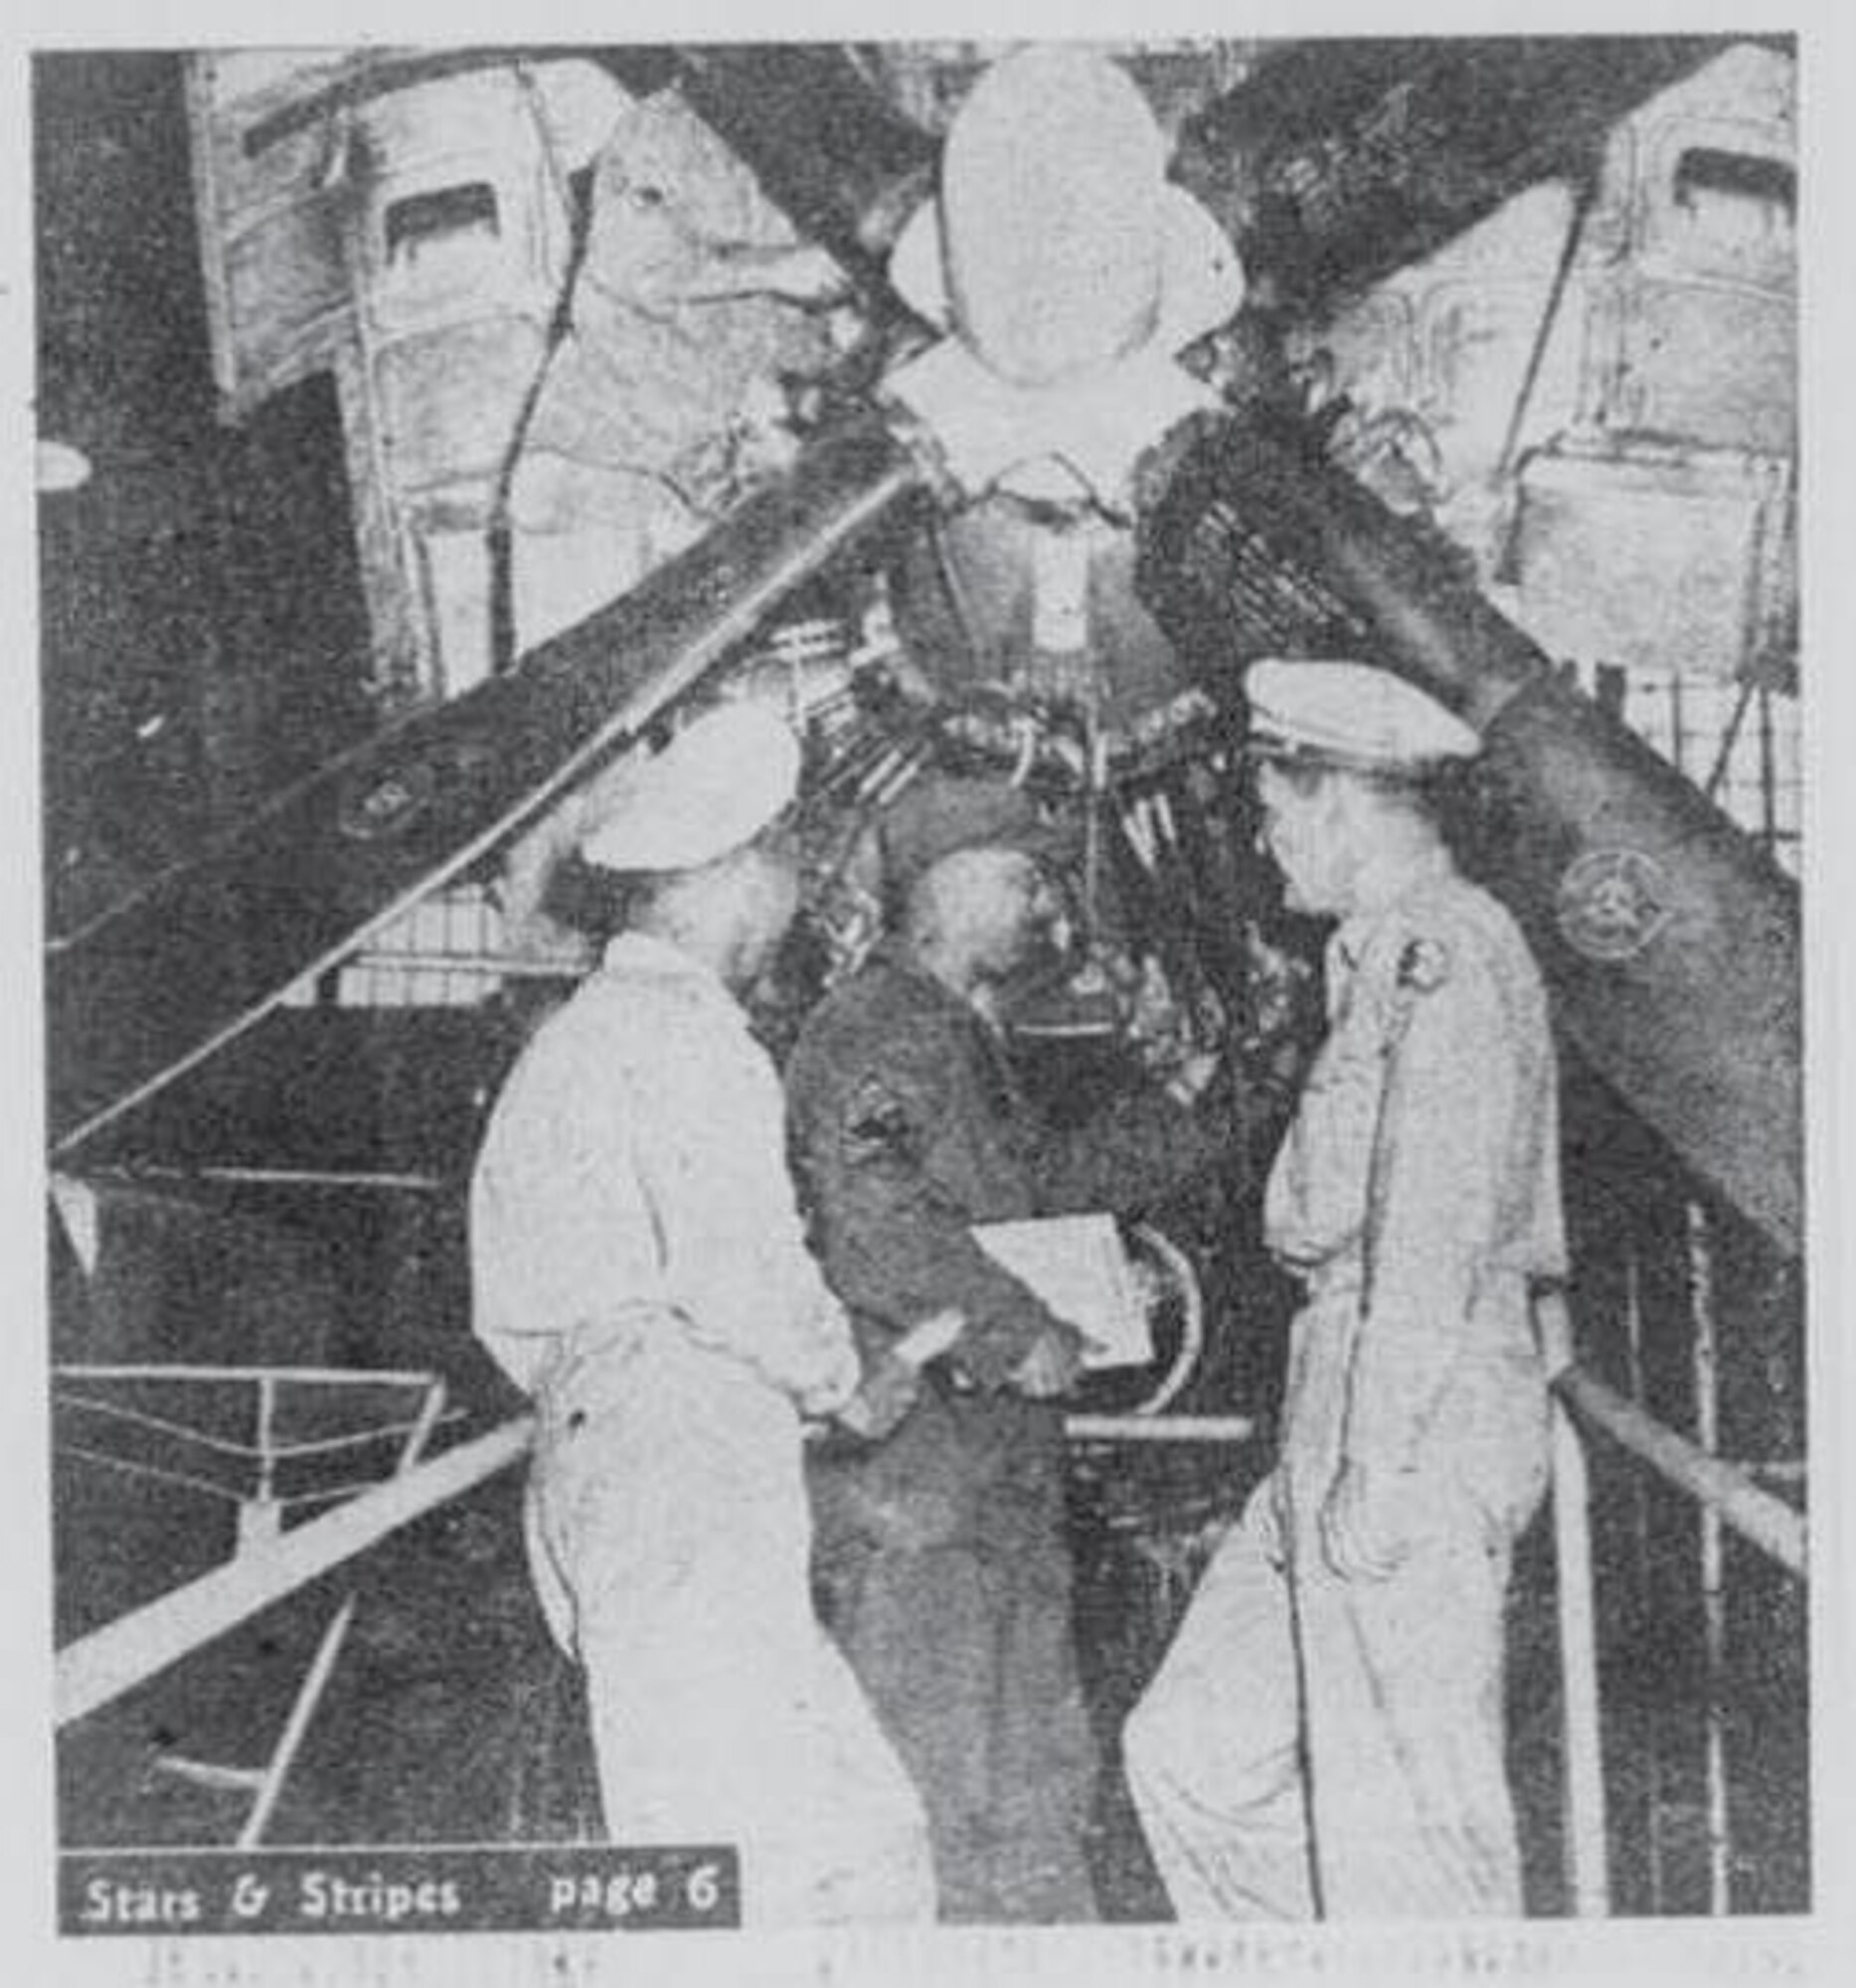 The 374th Maintenance Squadron propeller and engine inspection photos taken in the 1940’s, at Yokota Air Base, Japan.